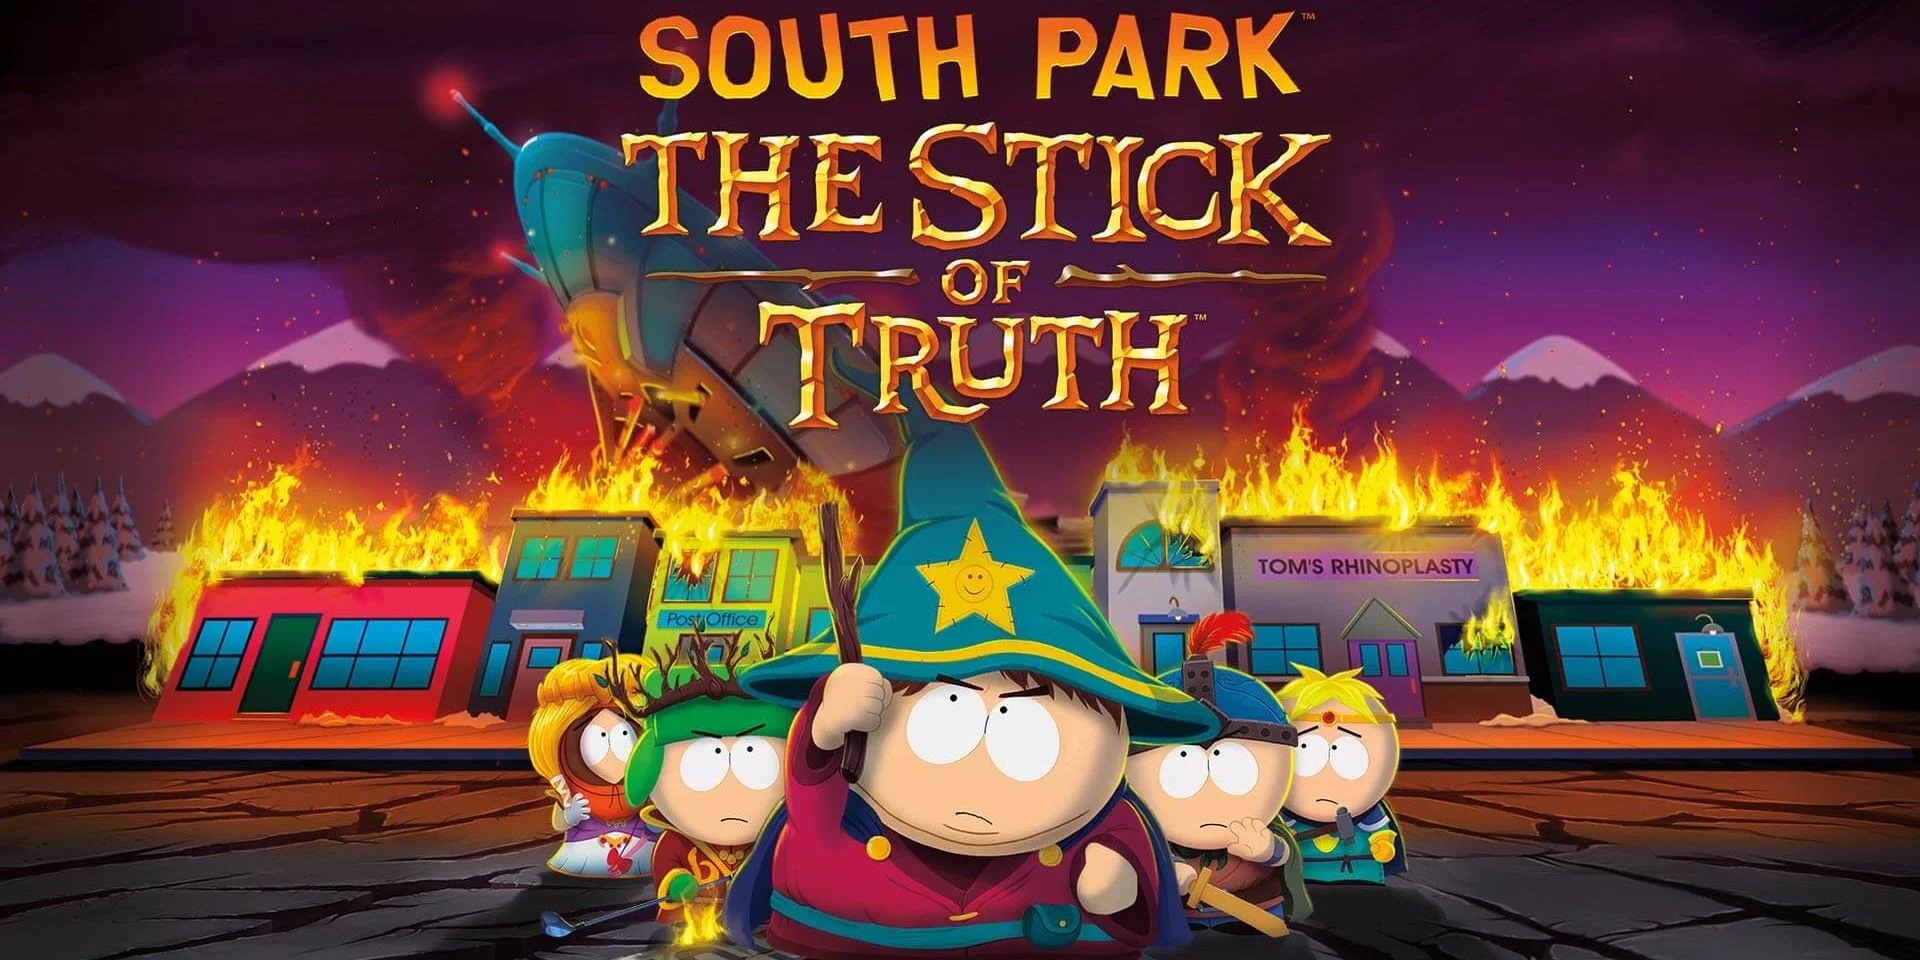 South park the stick of truth perverted